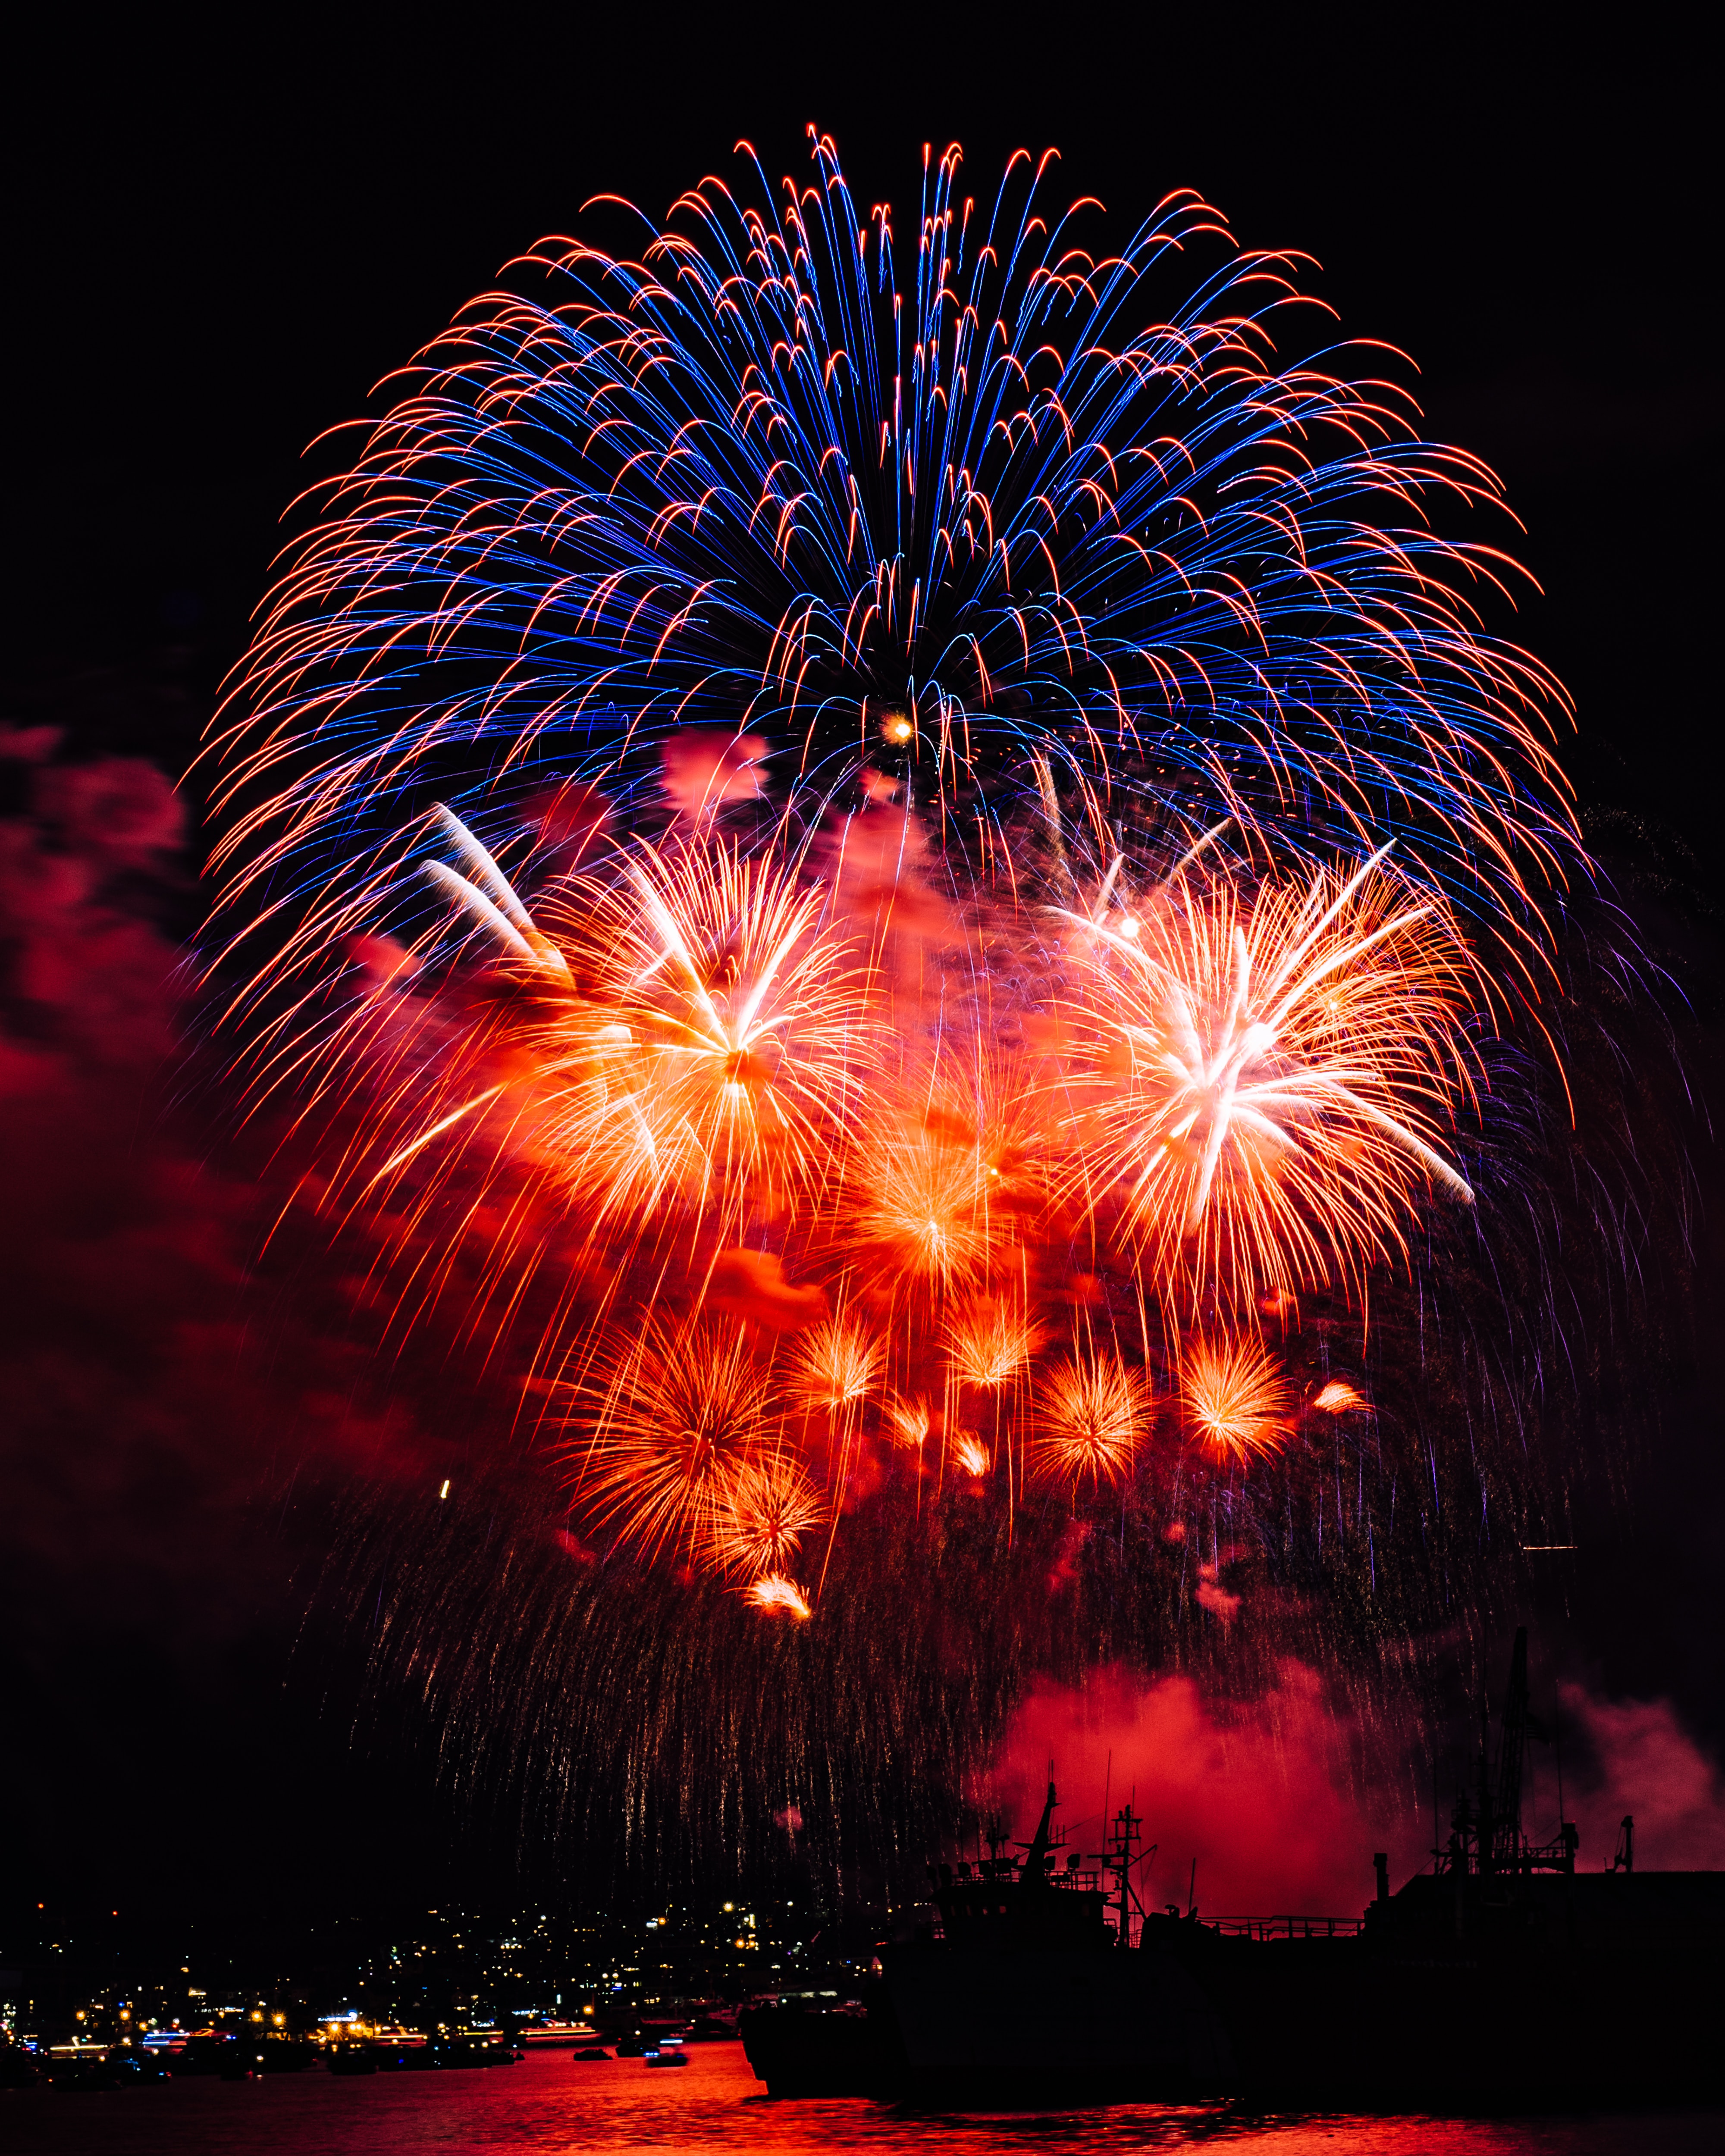 salute, holidays, night, motley, sparks, multicolored, fireworks, firework iphone wallpaper